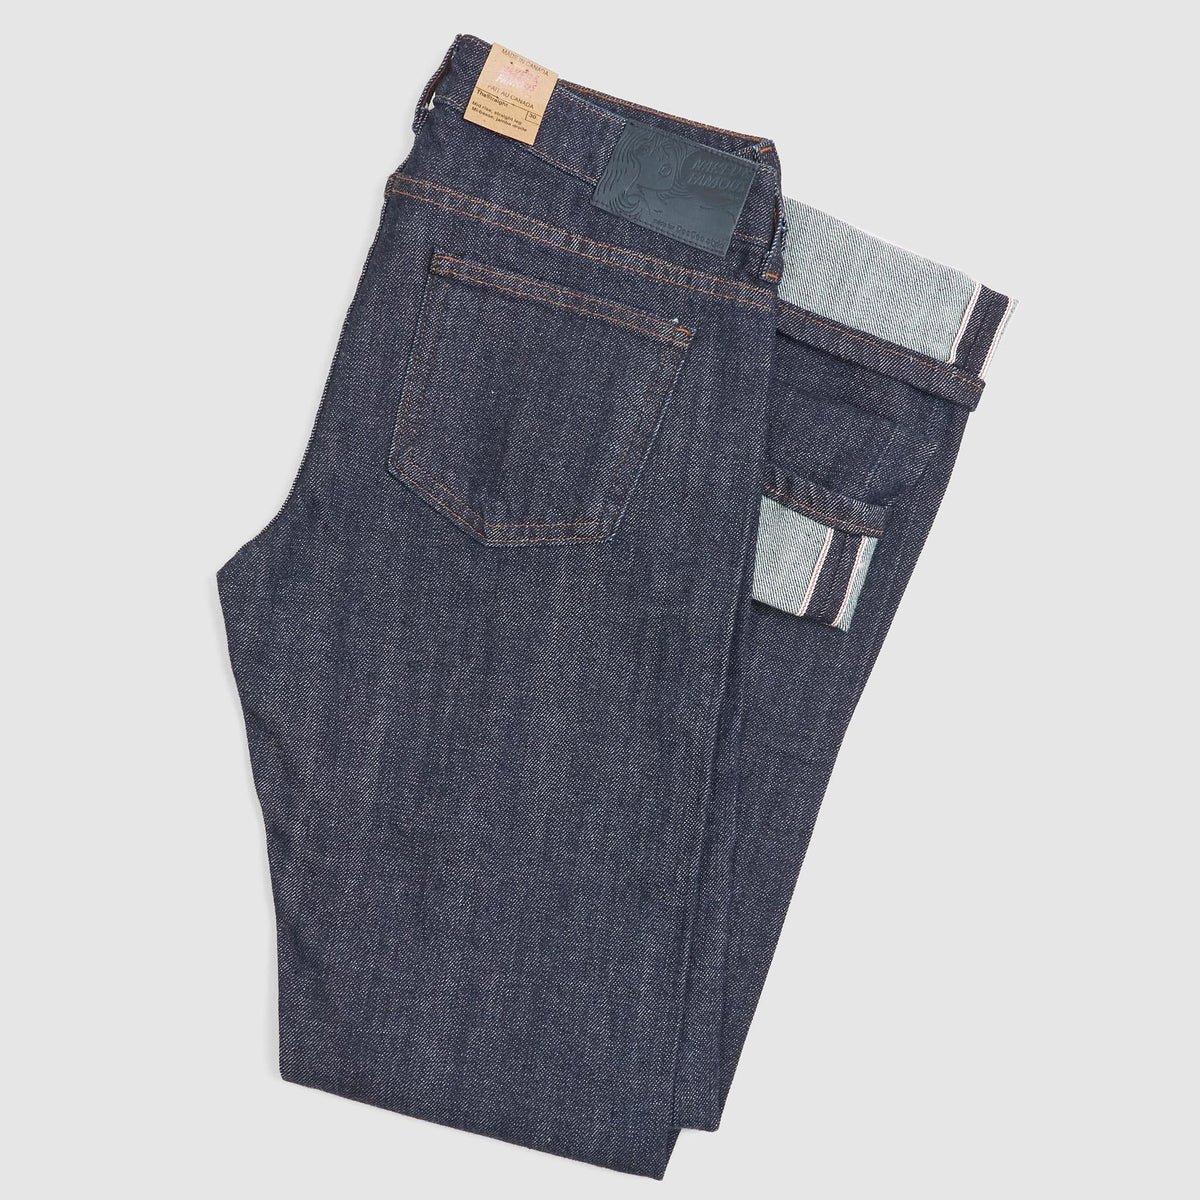 Naked &amp; Famous x DeeCee style Ladies Selvage Denim The Straight Rinsed